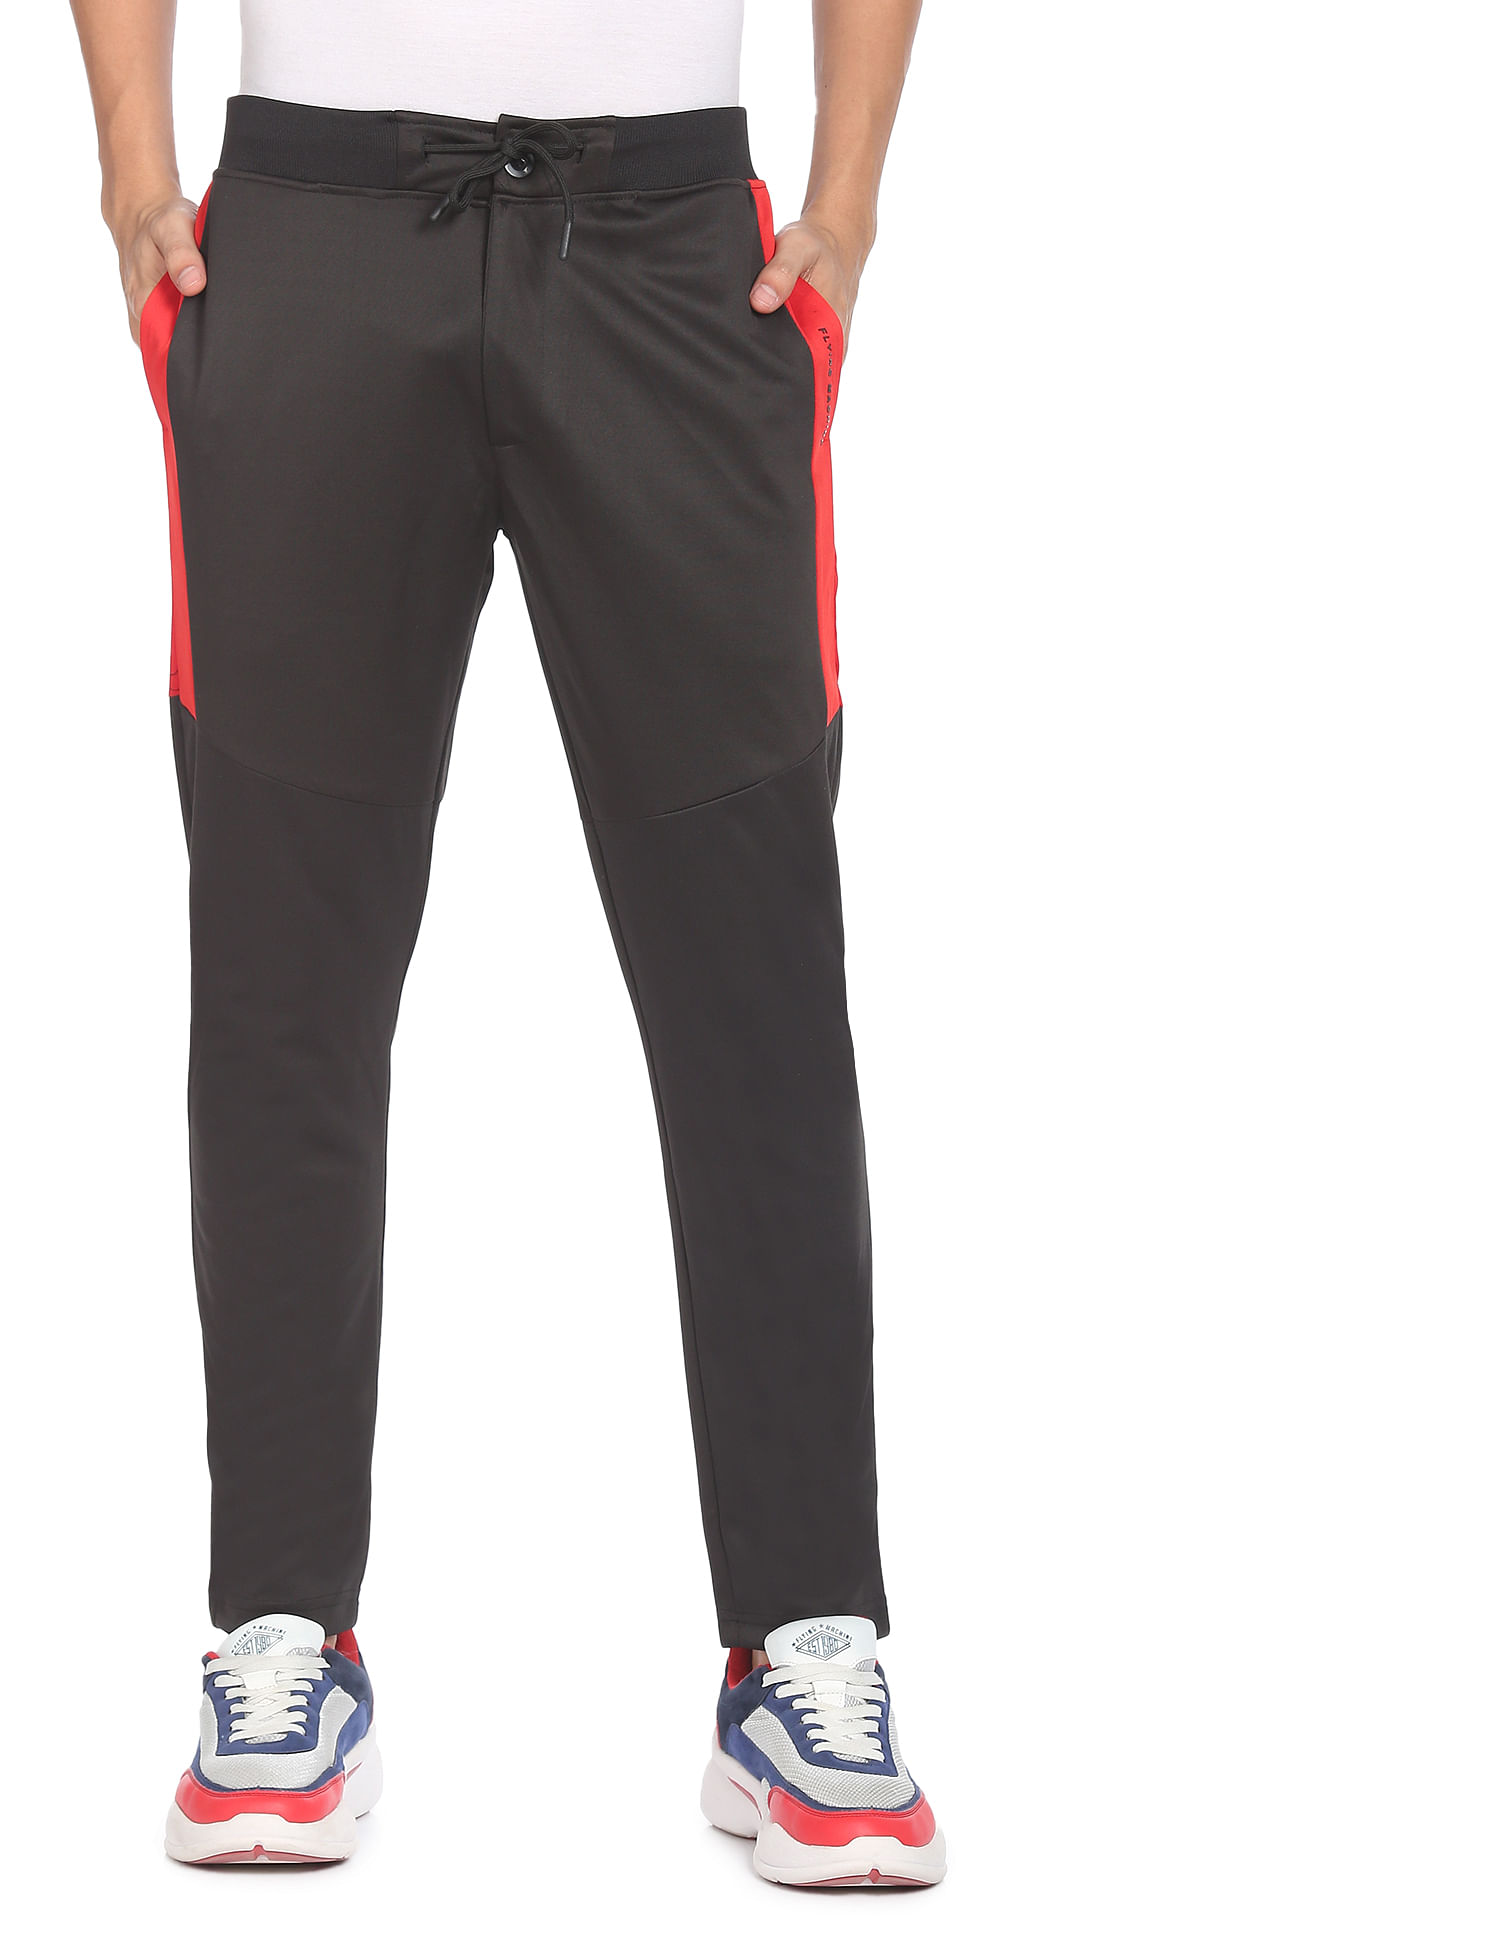 ANTA Men Pro Racing Challenges Running Knit Track Pants Tight Fit-cheohanoi.vn